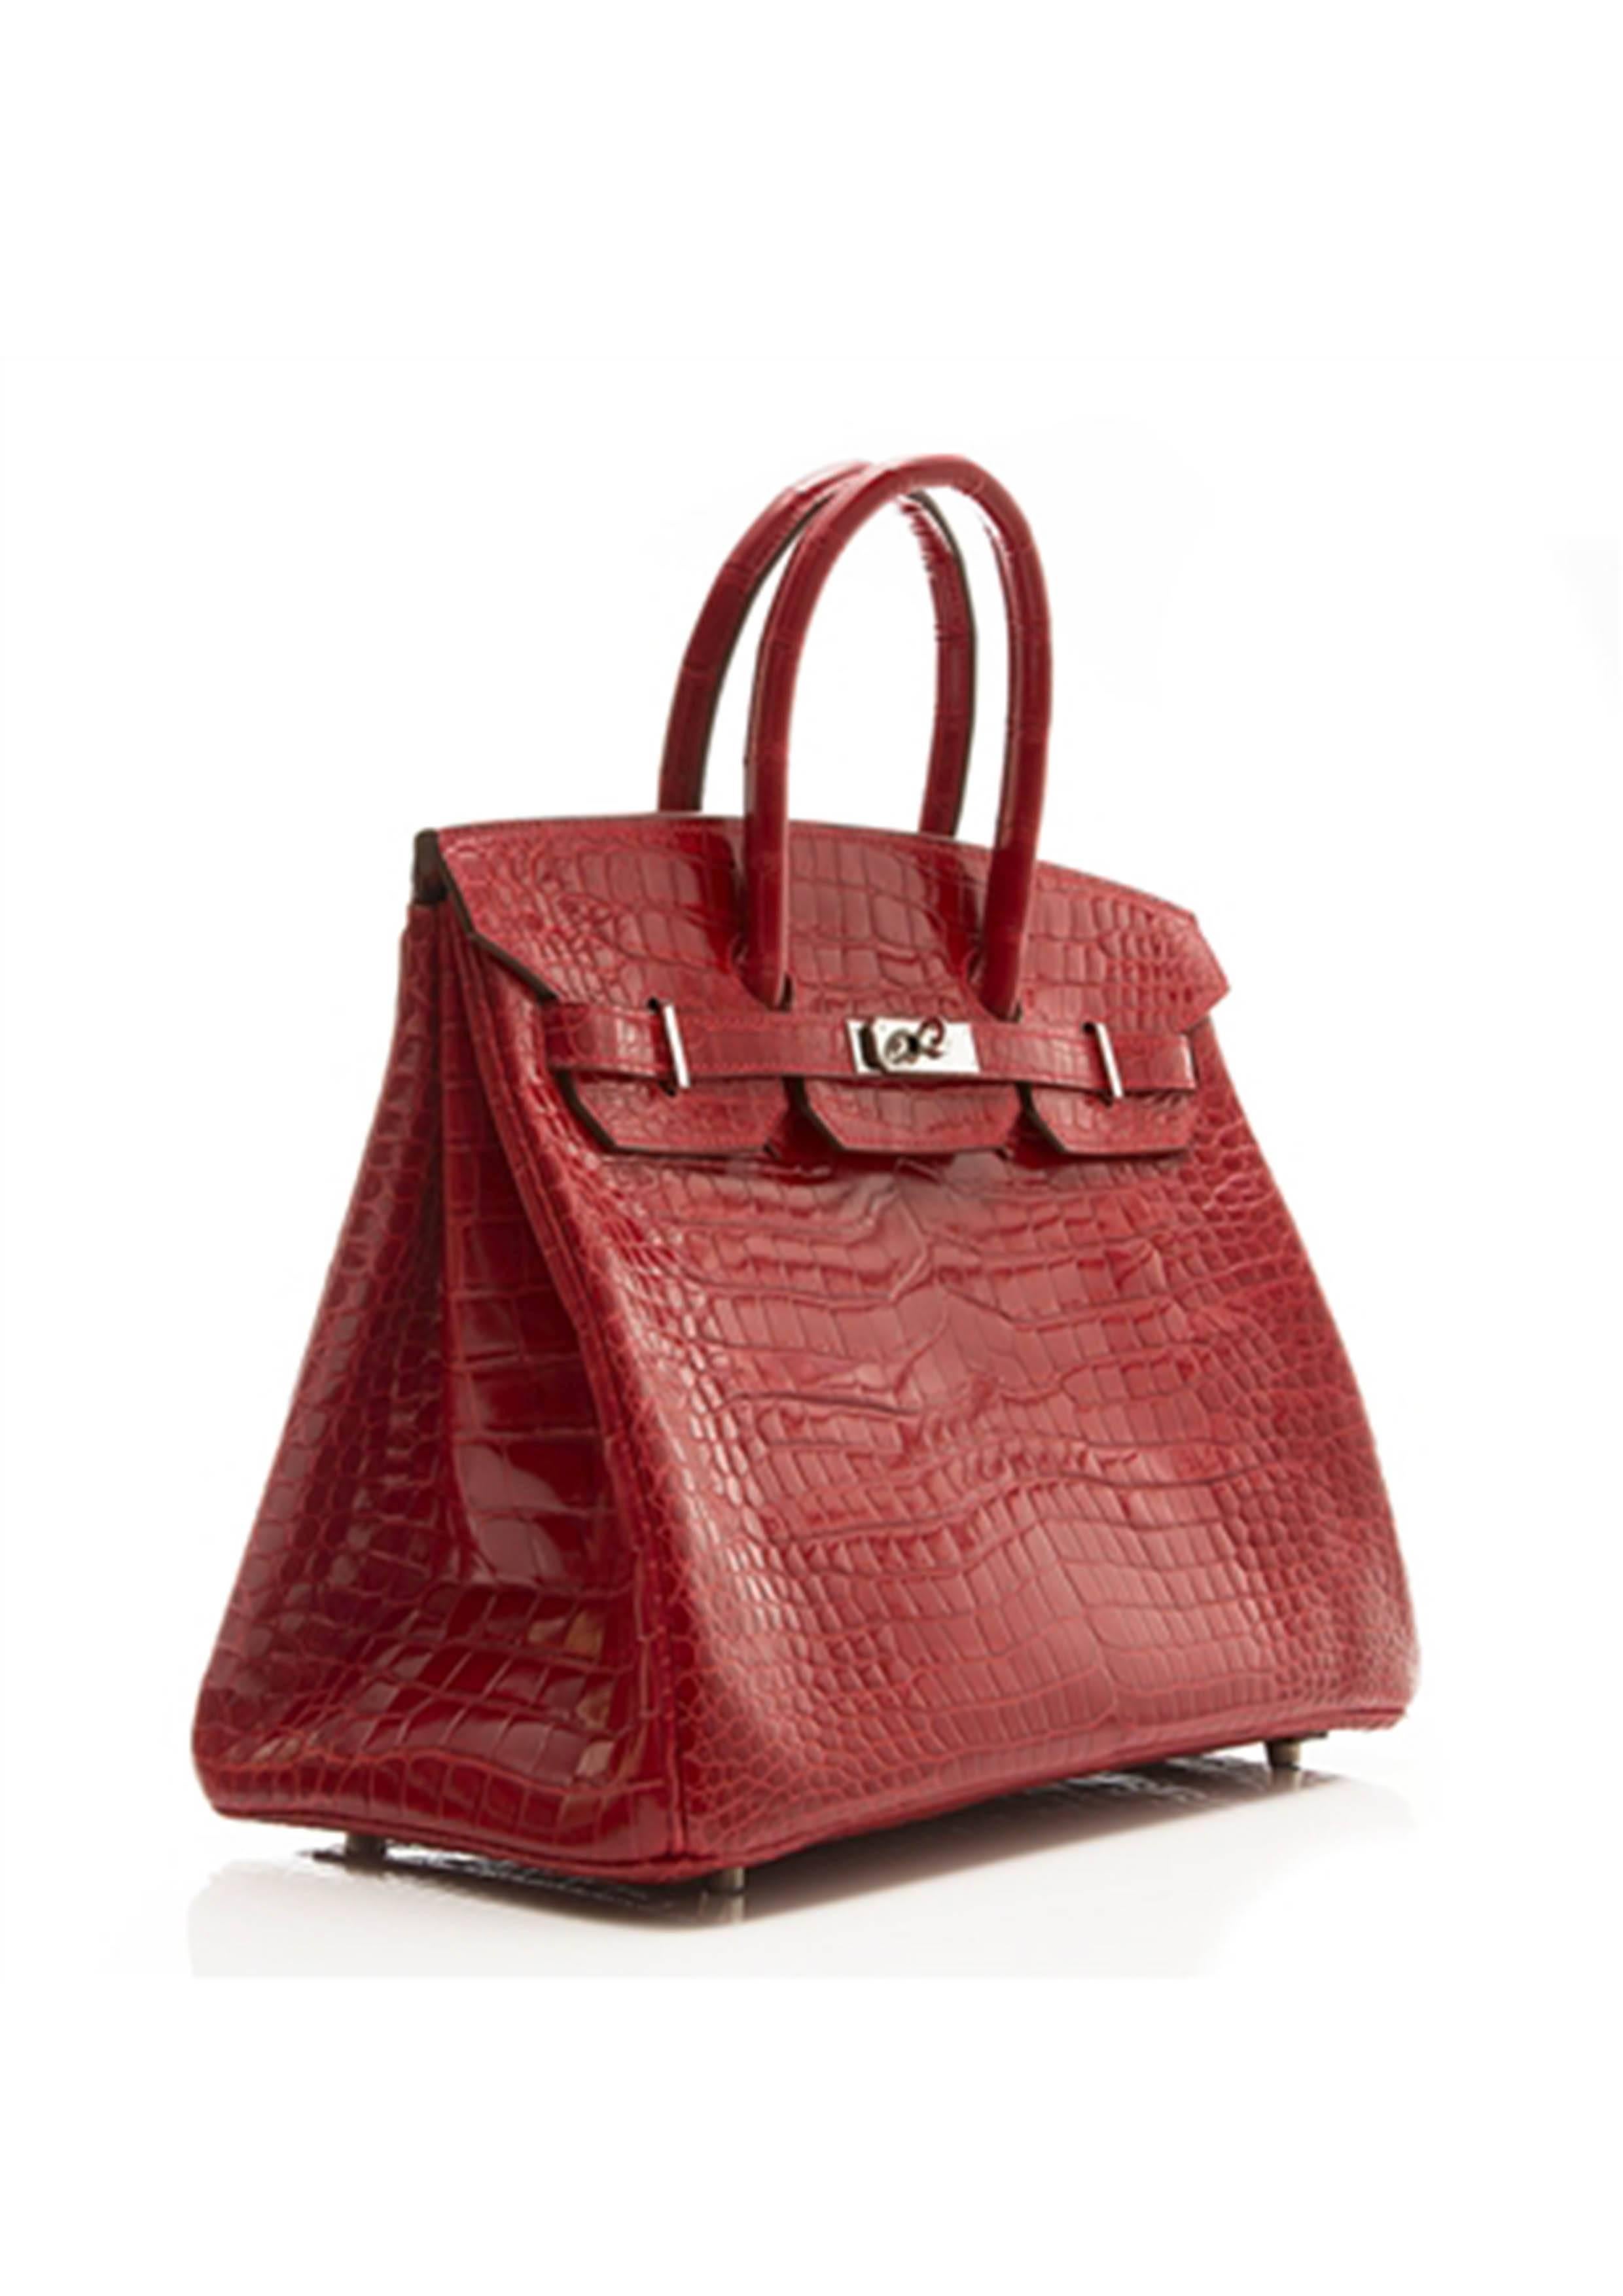 This truly exquisite piece represents the incredible craftsmanship one has come to expect from Hermés' Birkin bag range. The 35cm size is perfectly complemented by the bold Rouge Braise colour of the Porosus crocodile leather and palladuim